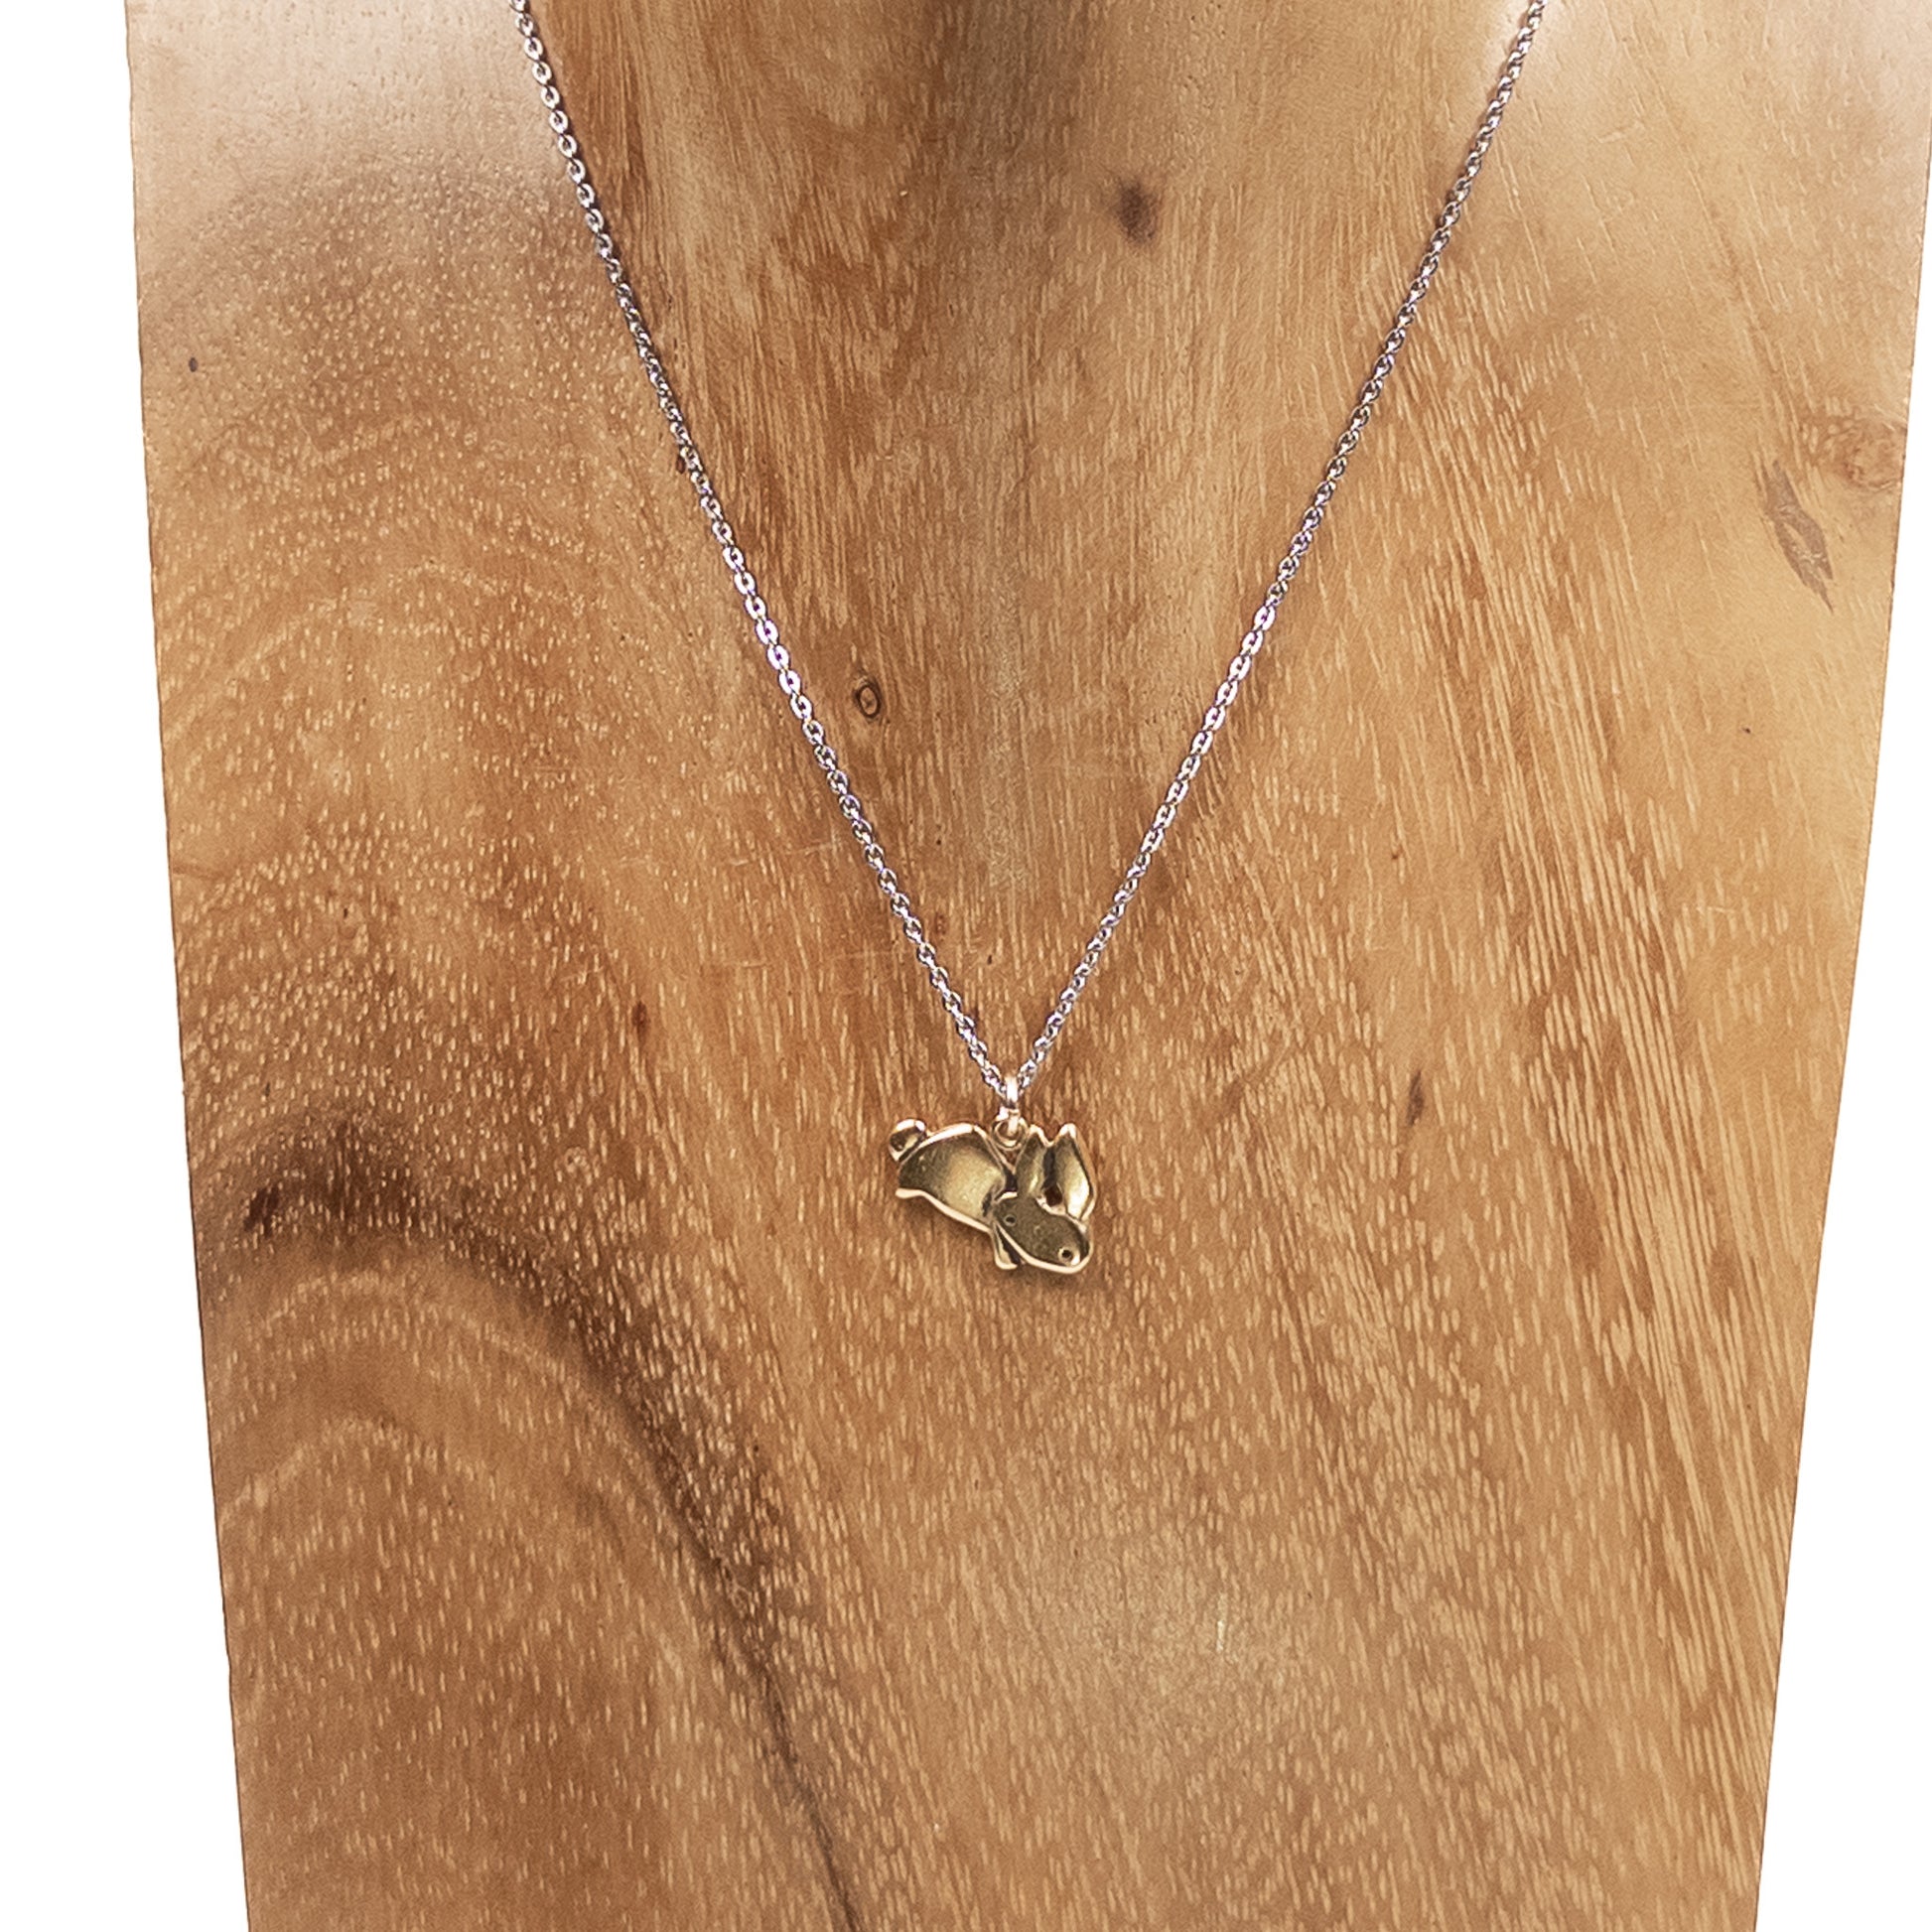 Baby Bunny Necklace (2 Metal Options) - 1 pc.-The Bead Gallery Honolulu